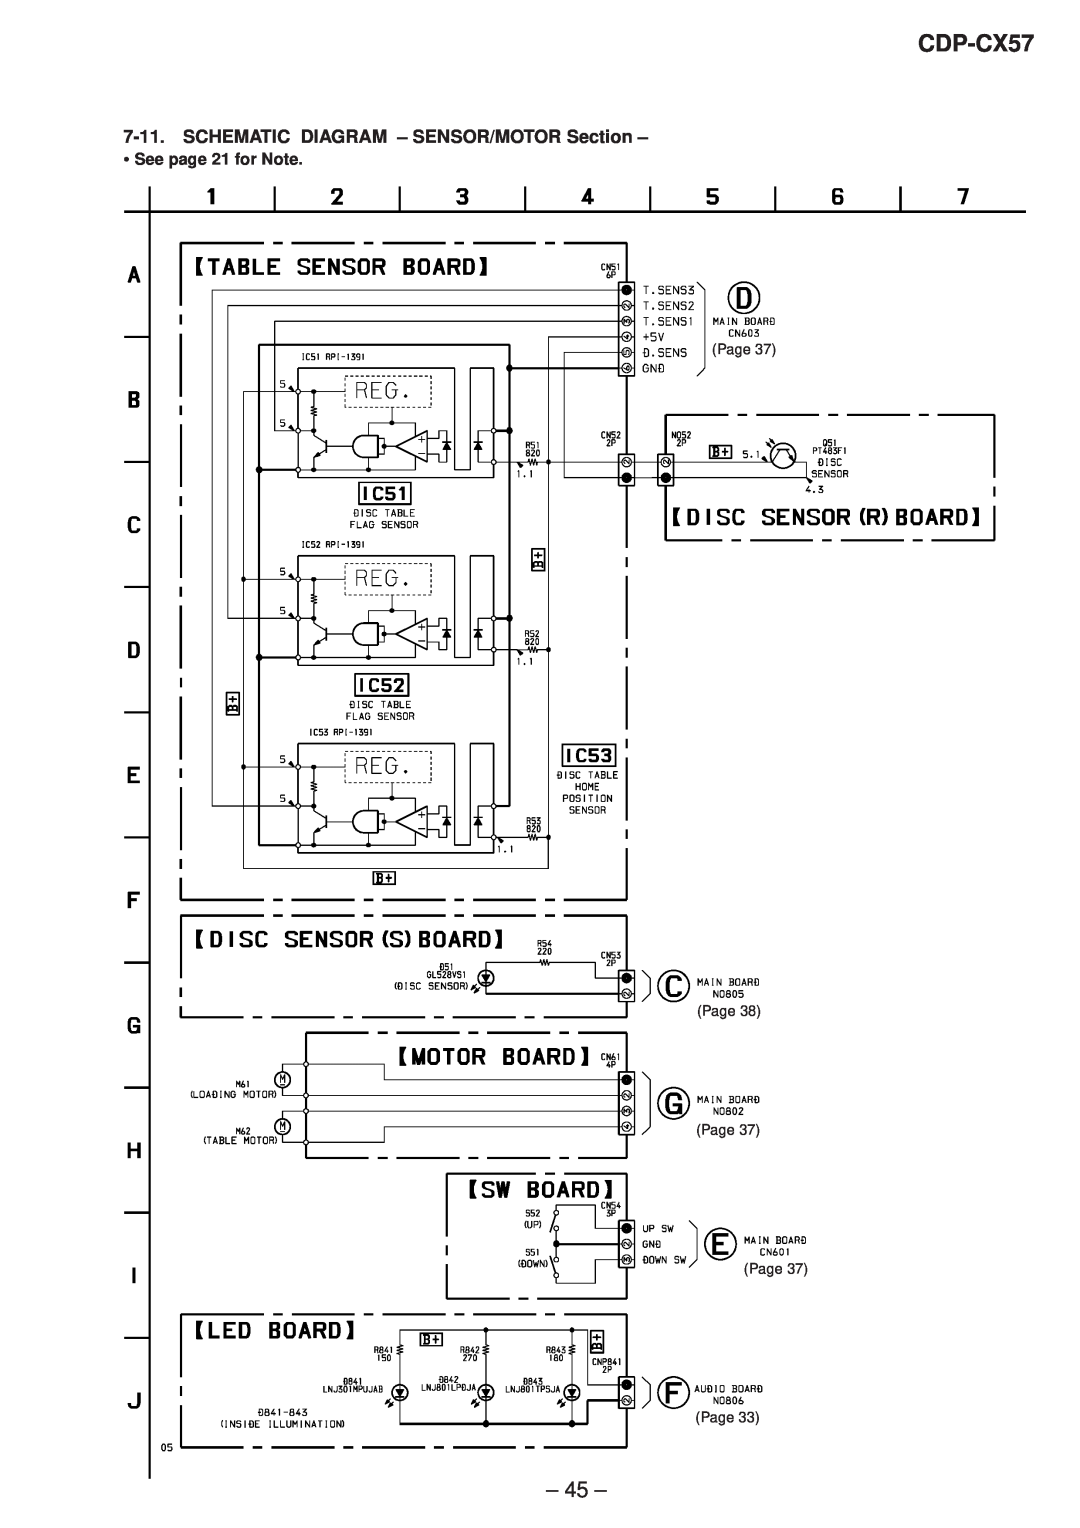 Technicolor - Thomson CDP-CX57 service manual SCHEMATIC DIAGRAM - SENSOR/MOTOR Section, See page 21 for Note 